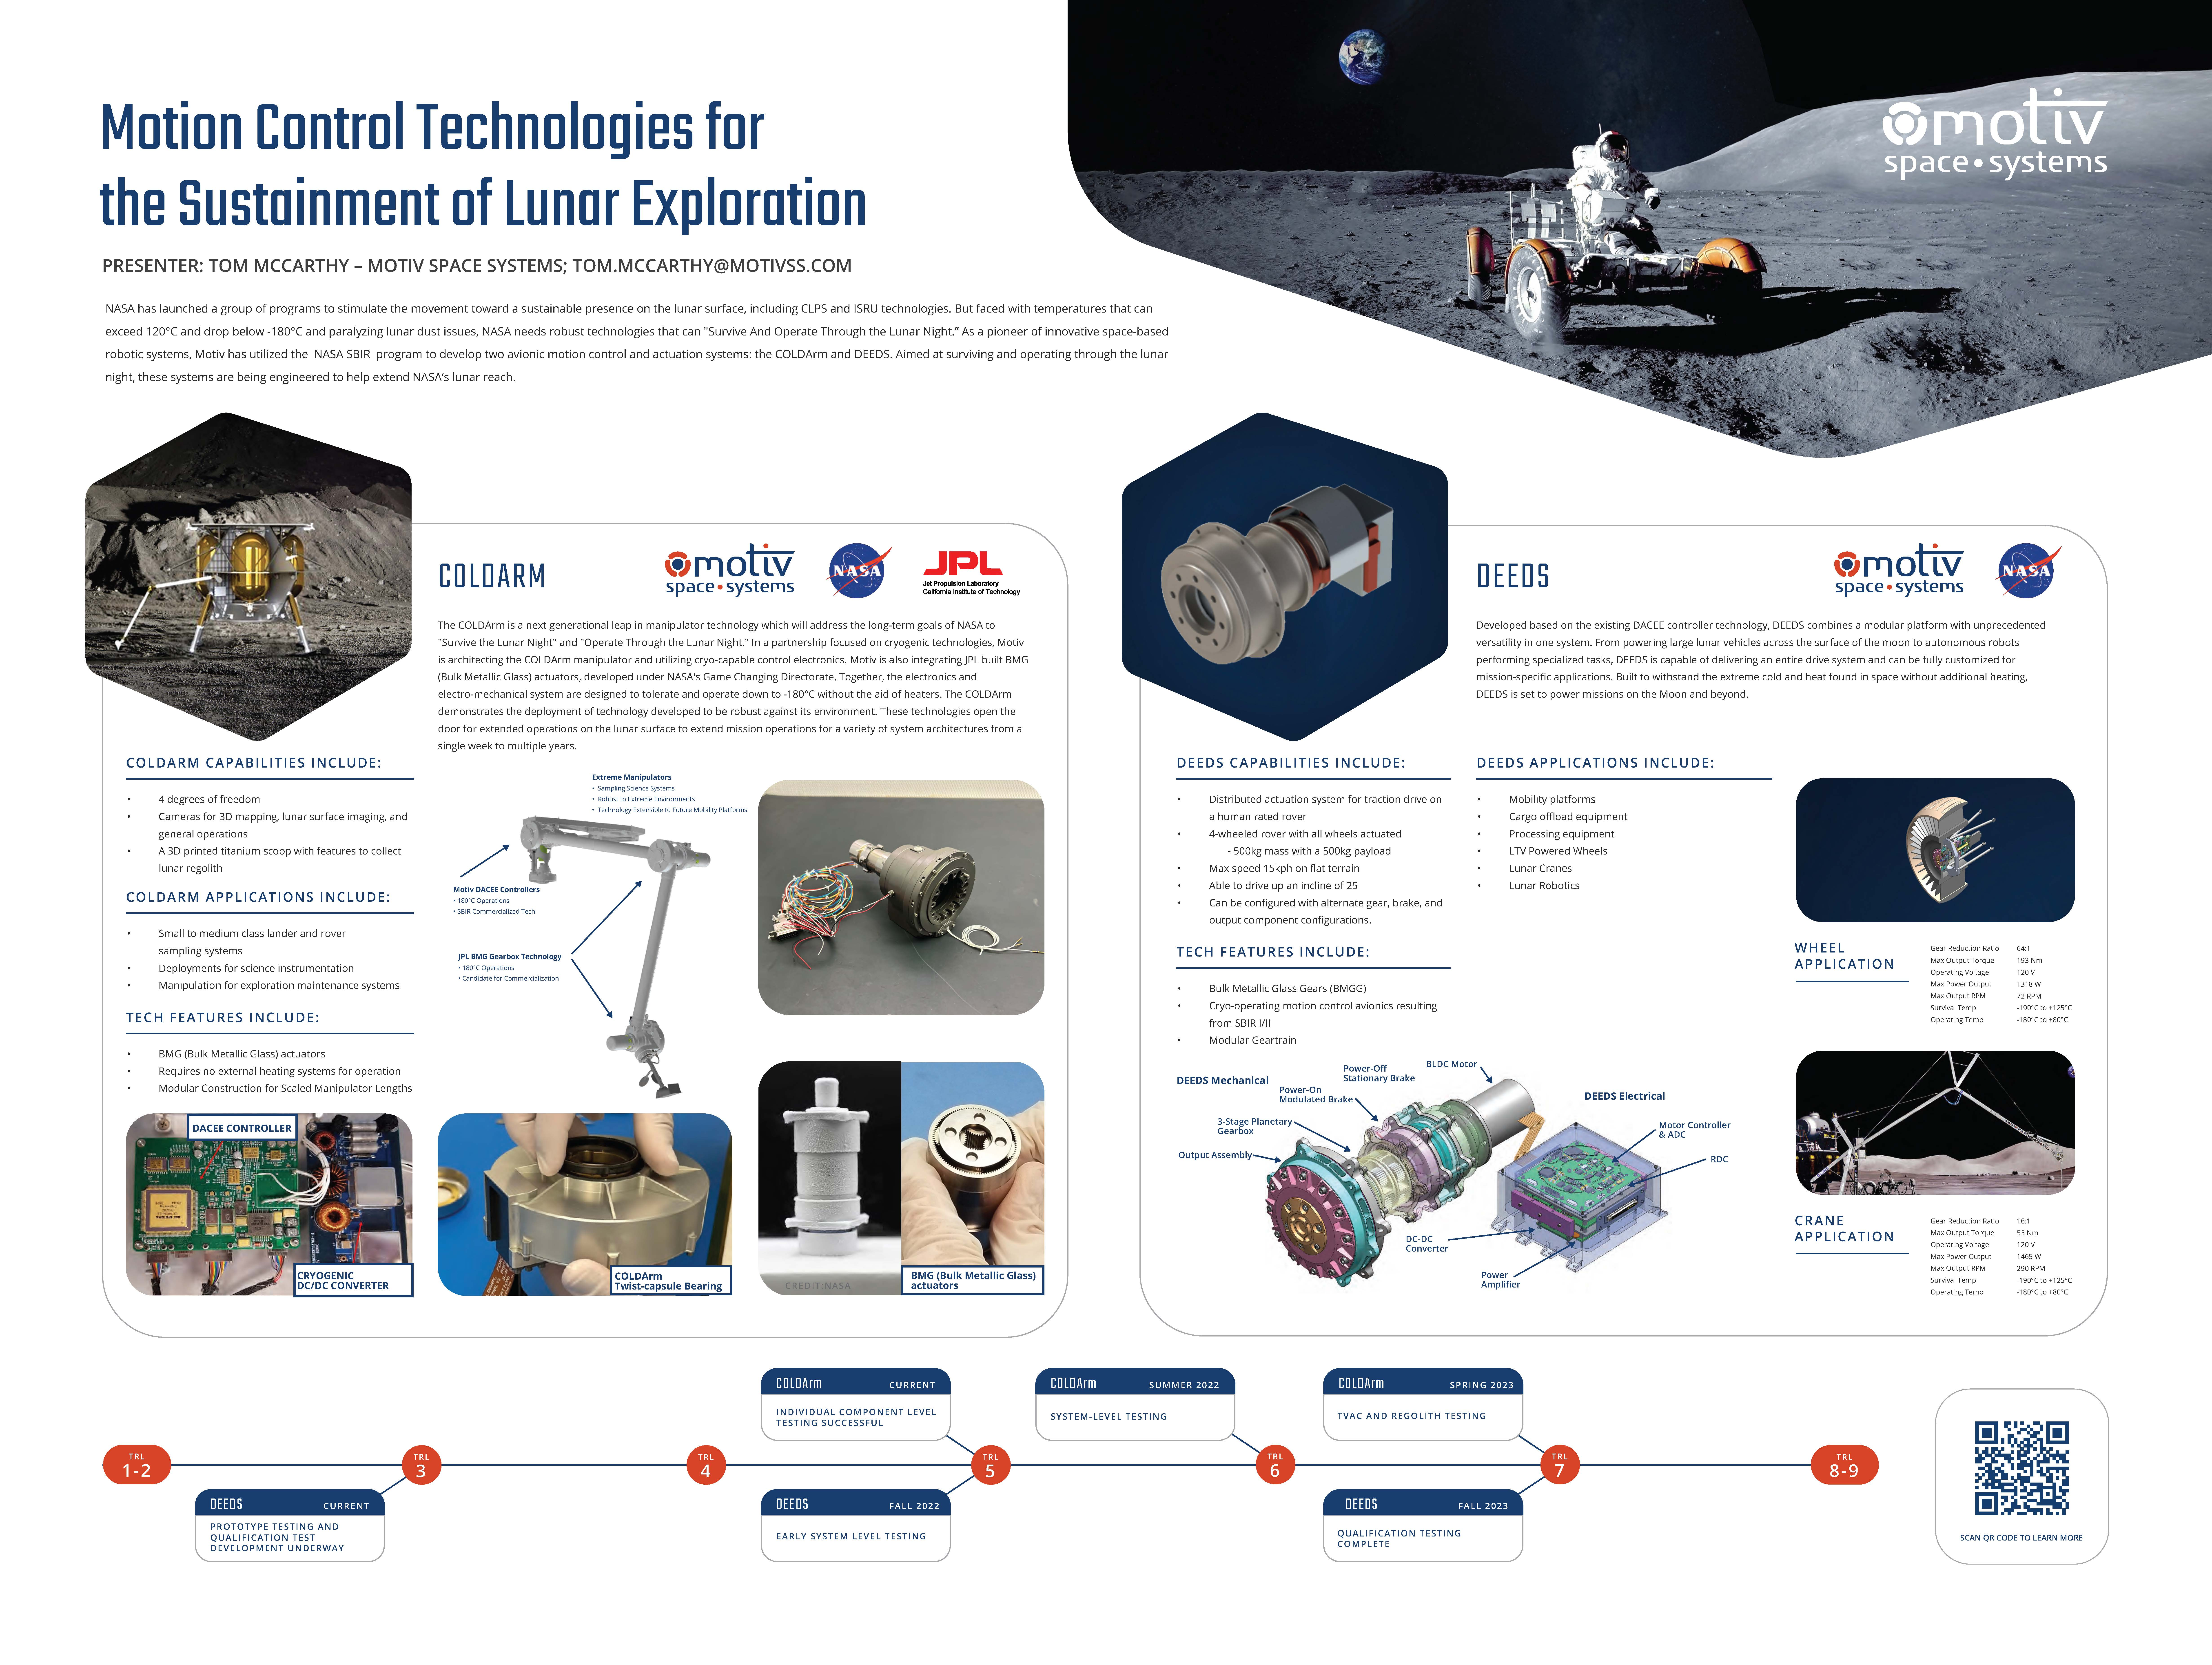 Motion Control Technologies for the Sustainment of Lunar Exploration